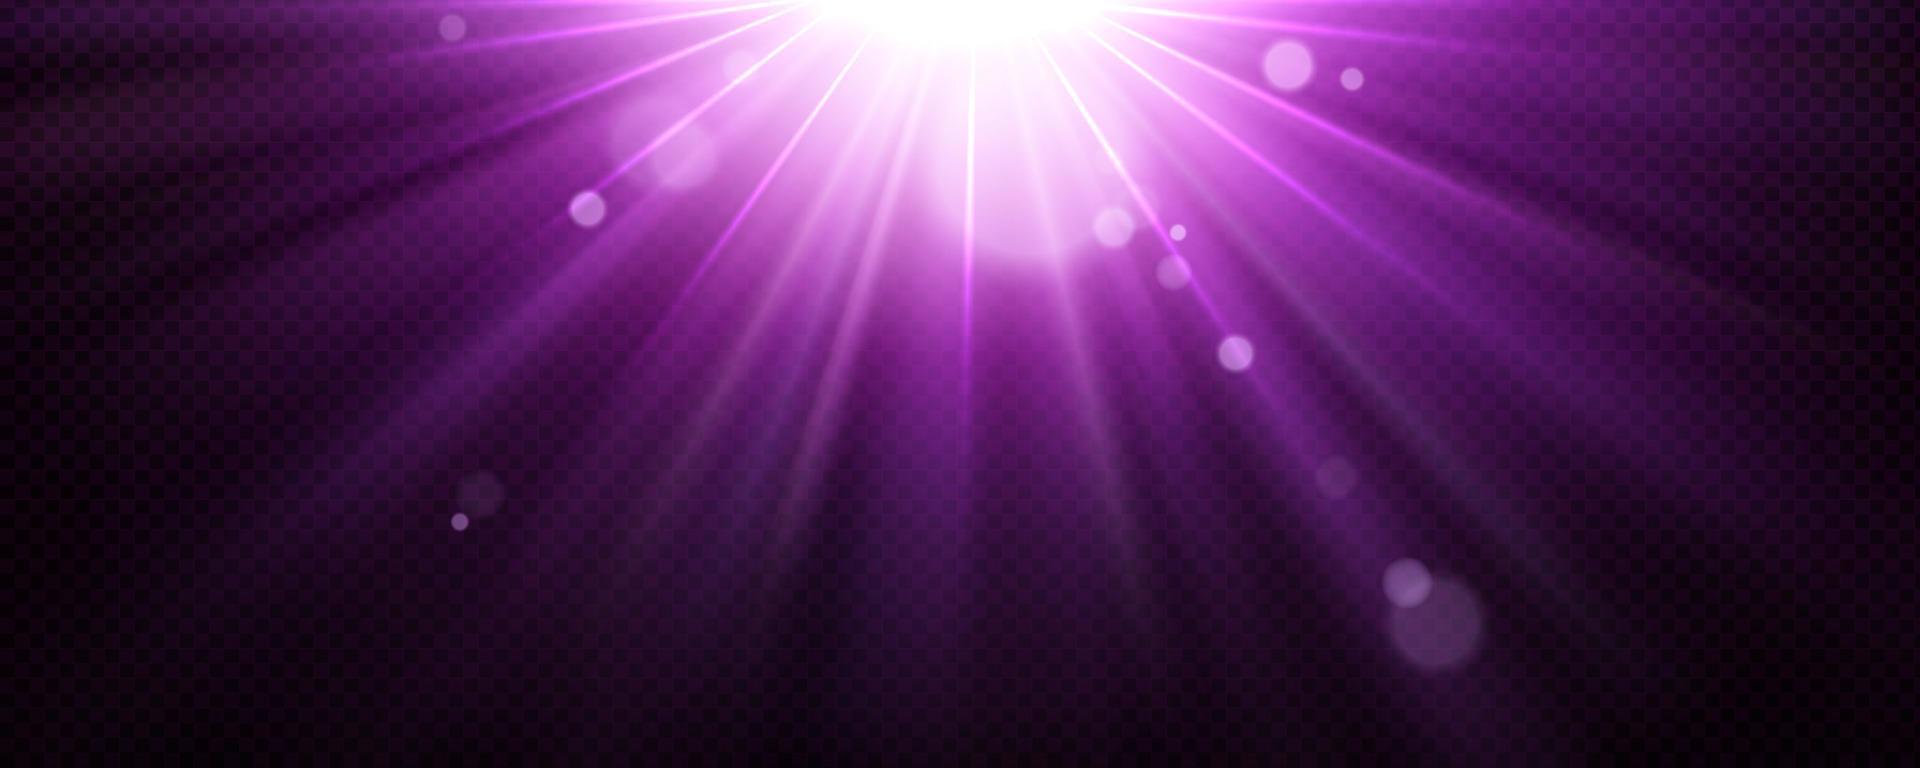 Light background with purple beams and flare 3d vector